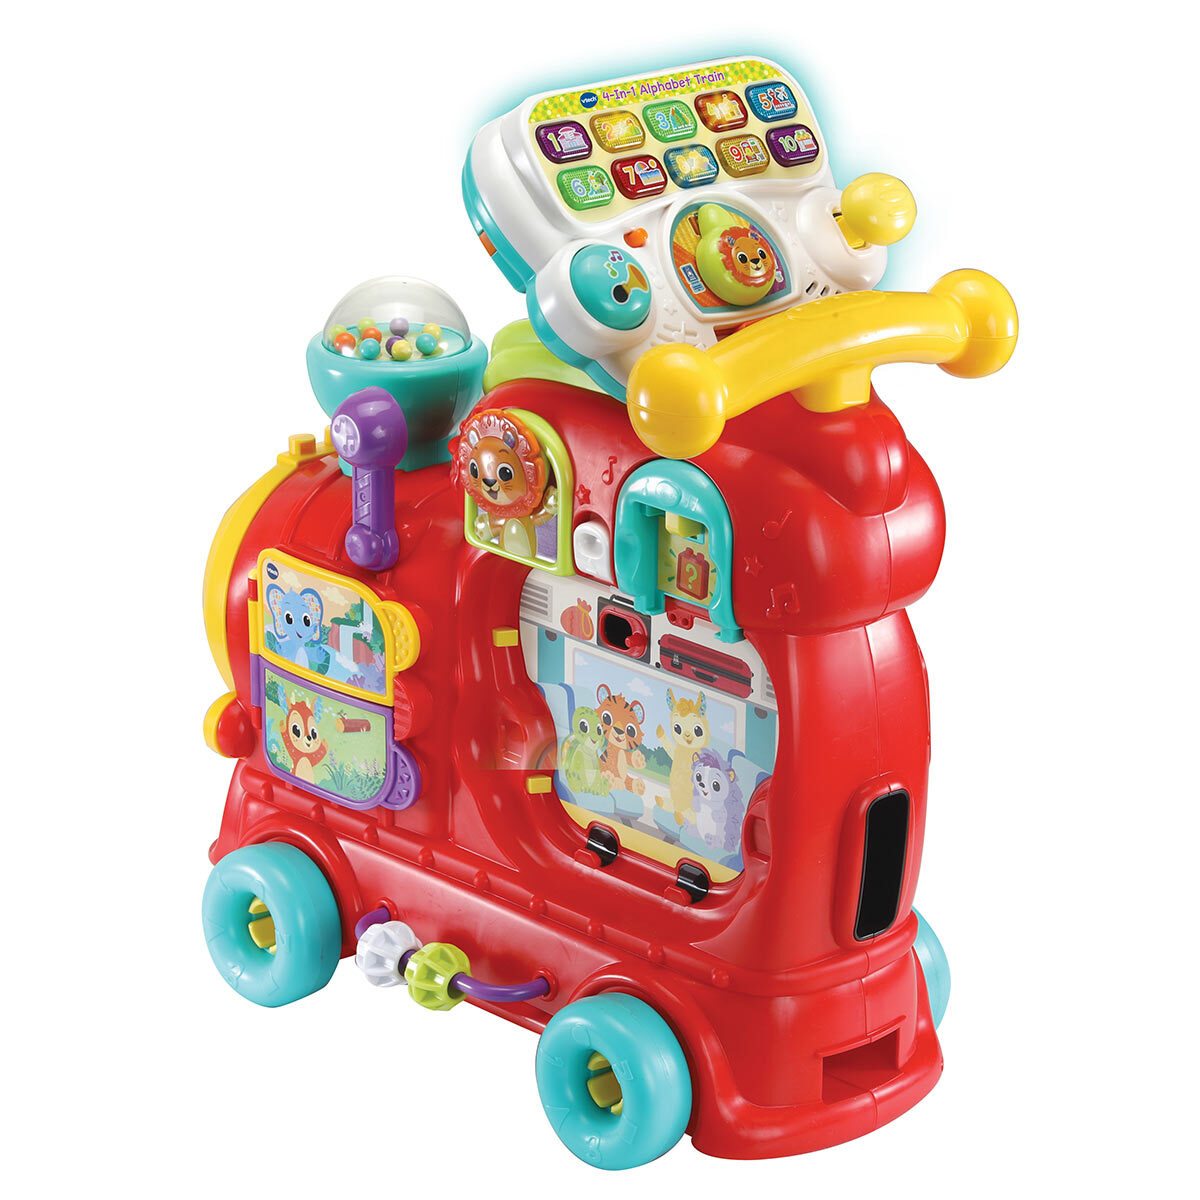 Buy VTech 4-in-1 Alphabet Train Set Overview Image at Costco.co.uk